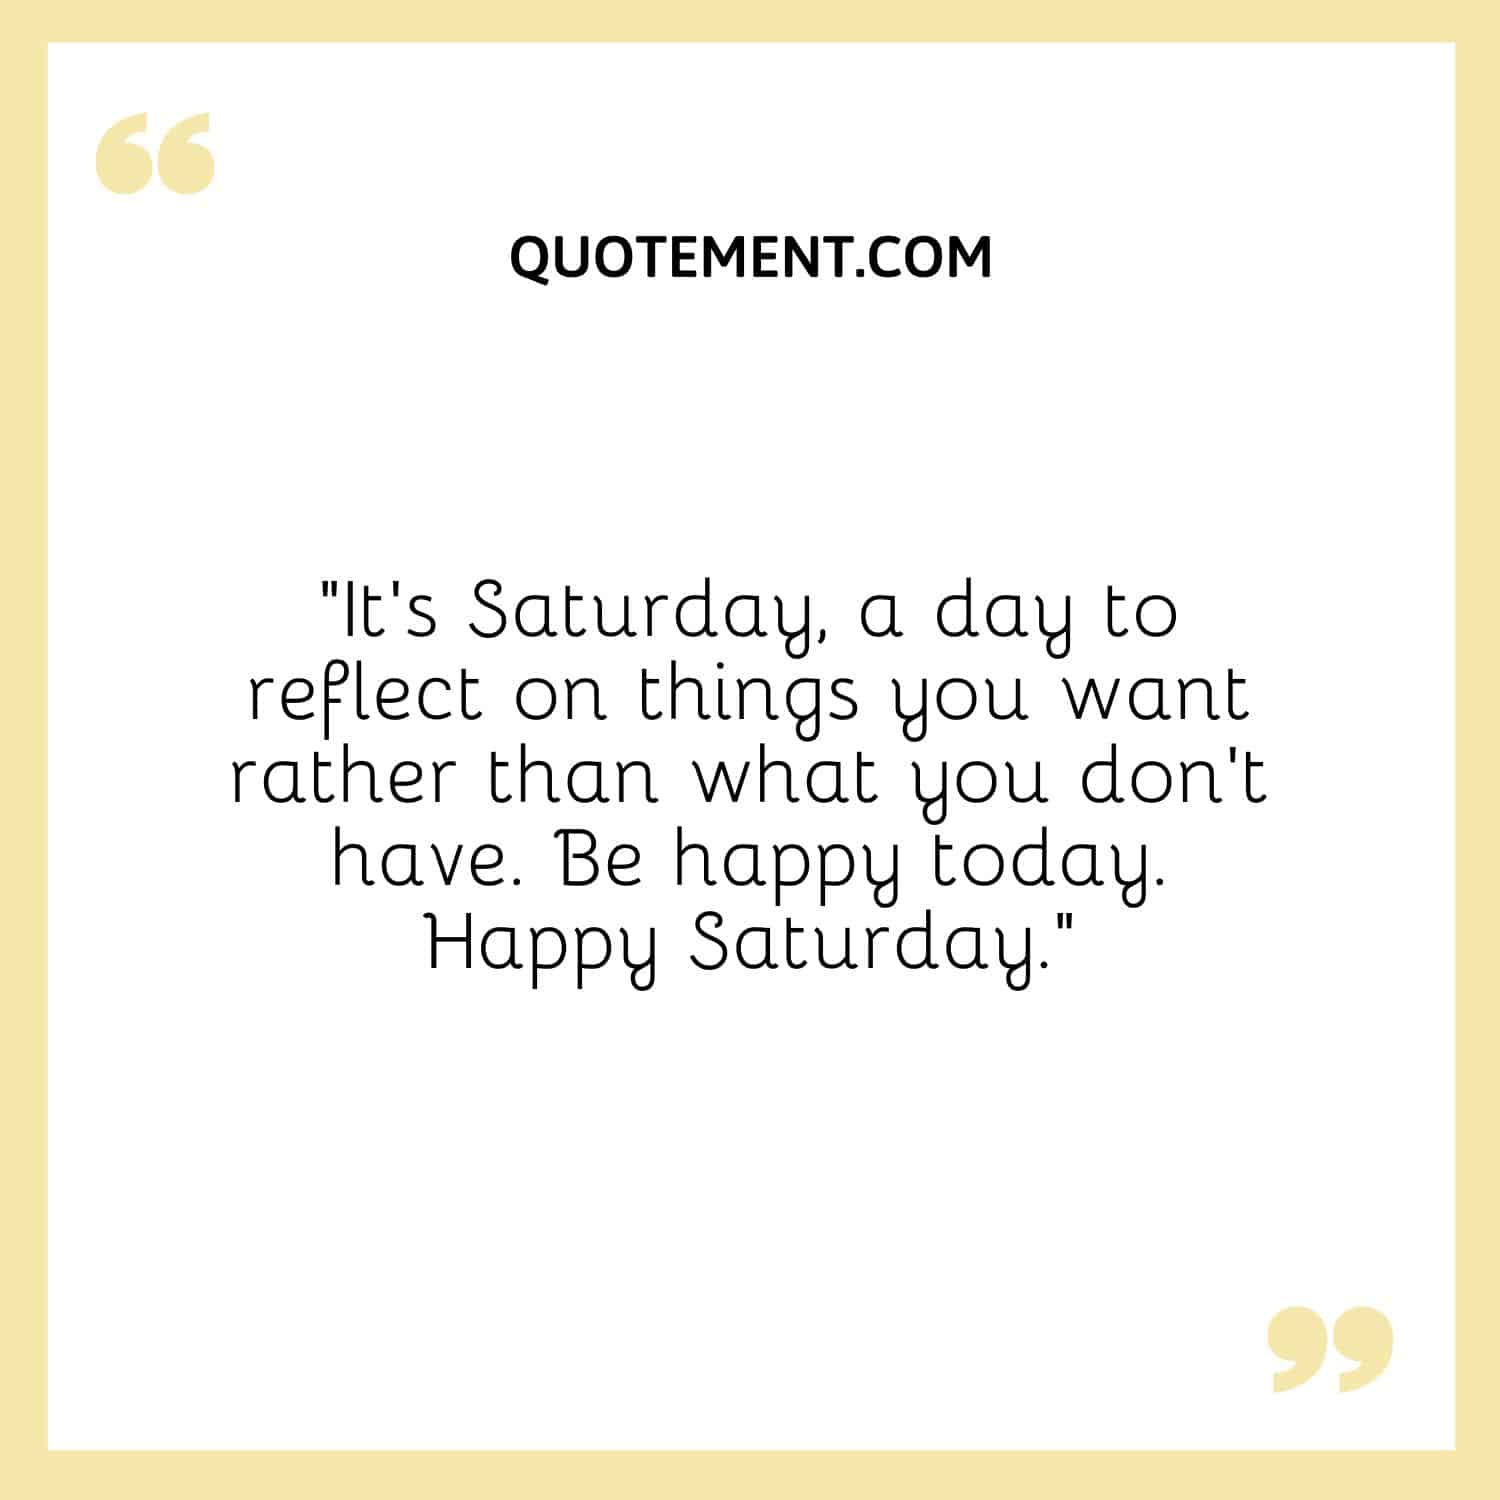 “It's Saturday, a day to reflect on things you want rather than what you don’t have. Be happy today. Happy Saturday.”